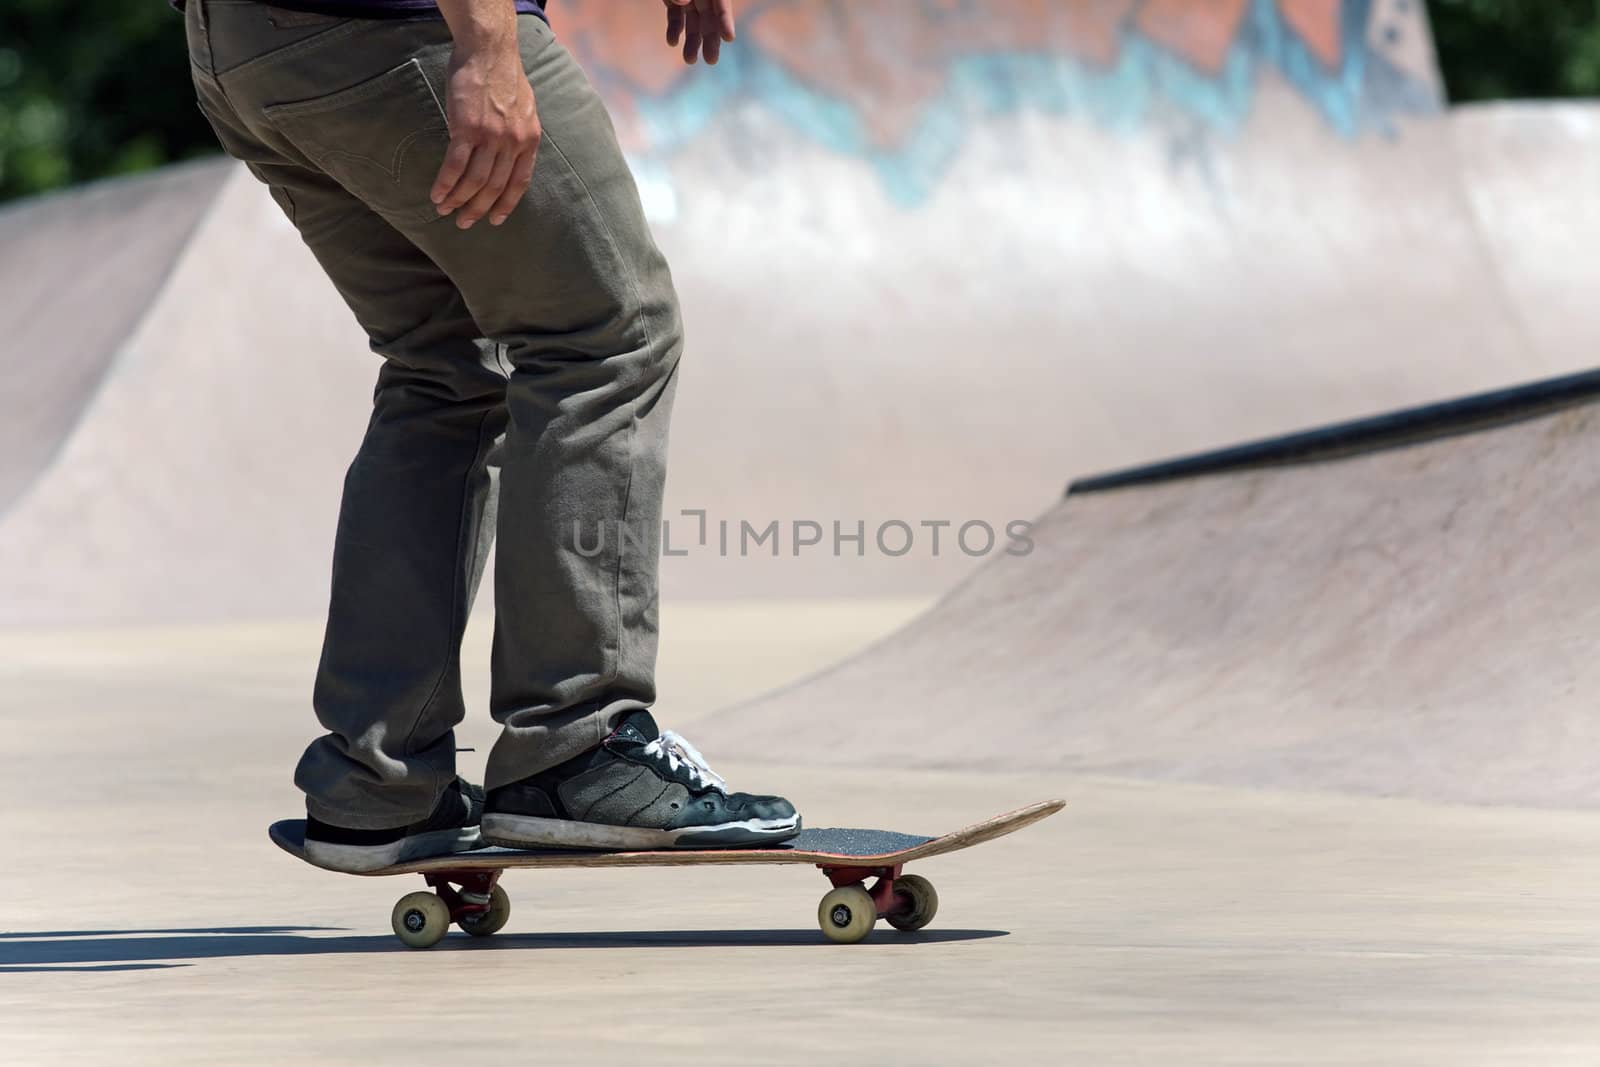 Action shot of a skateboarder skating at the skate park with concrete ramps.